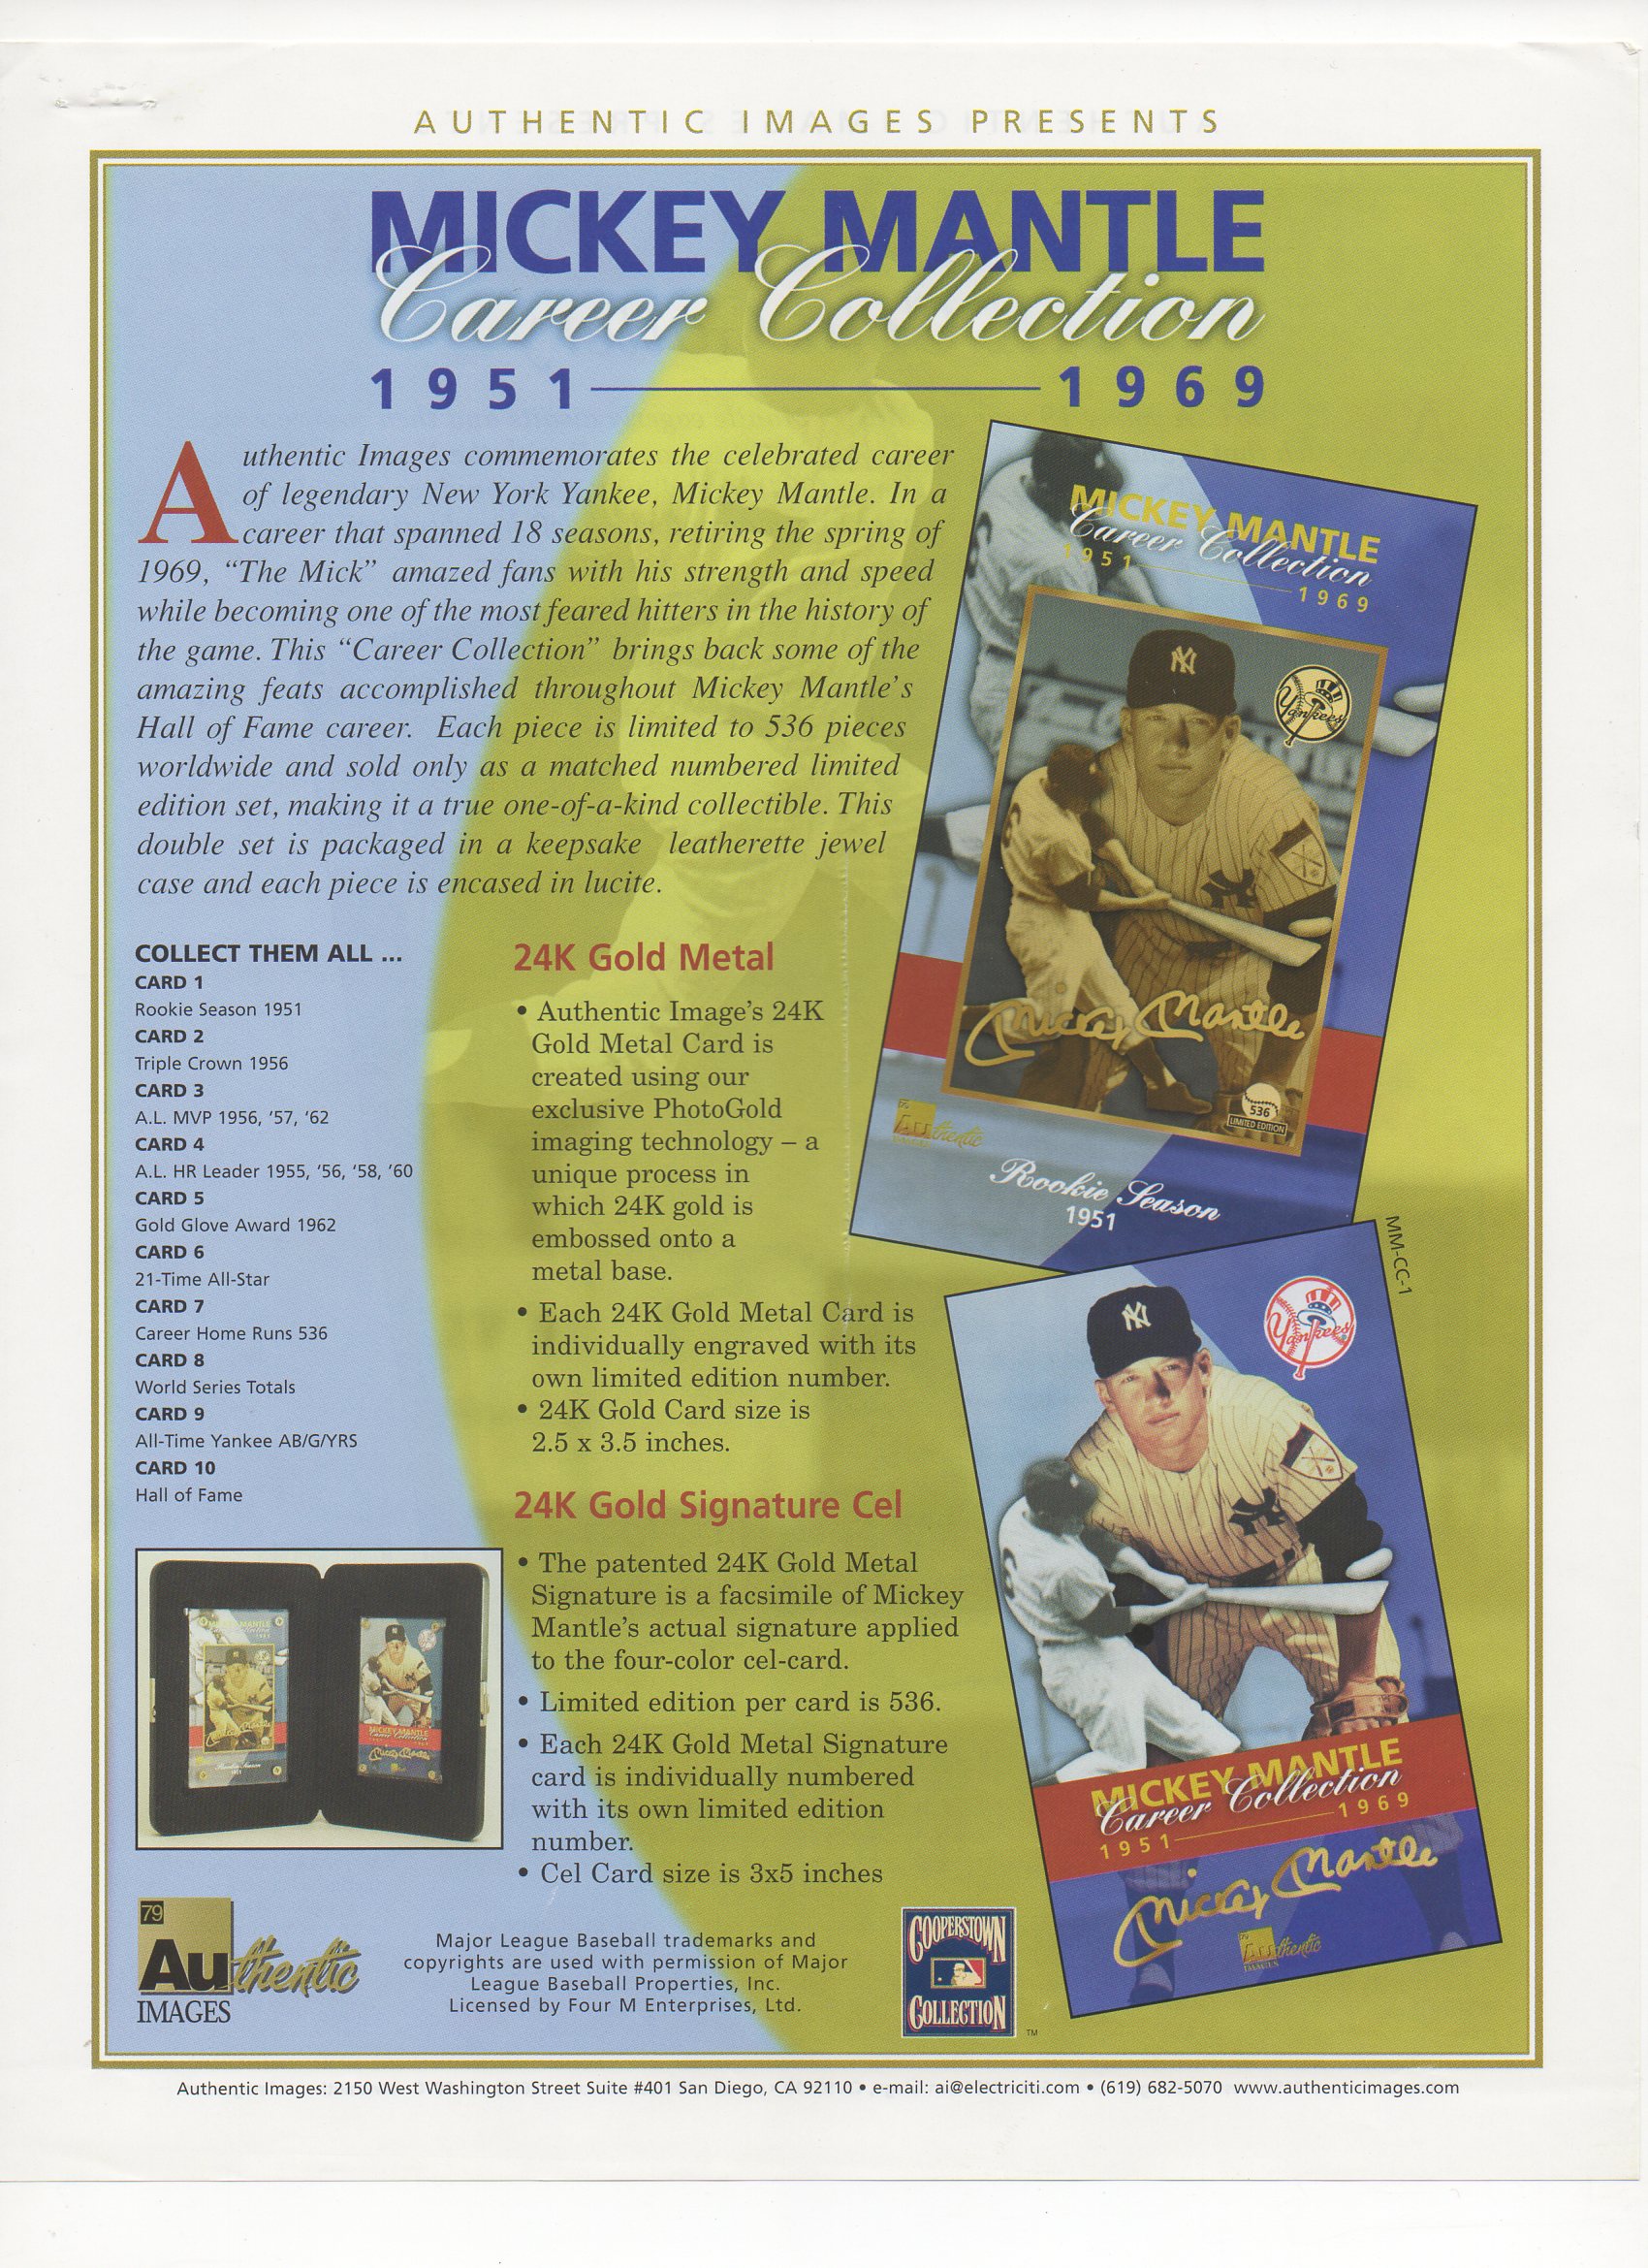 1997 american tract